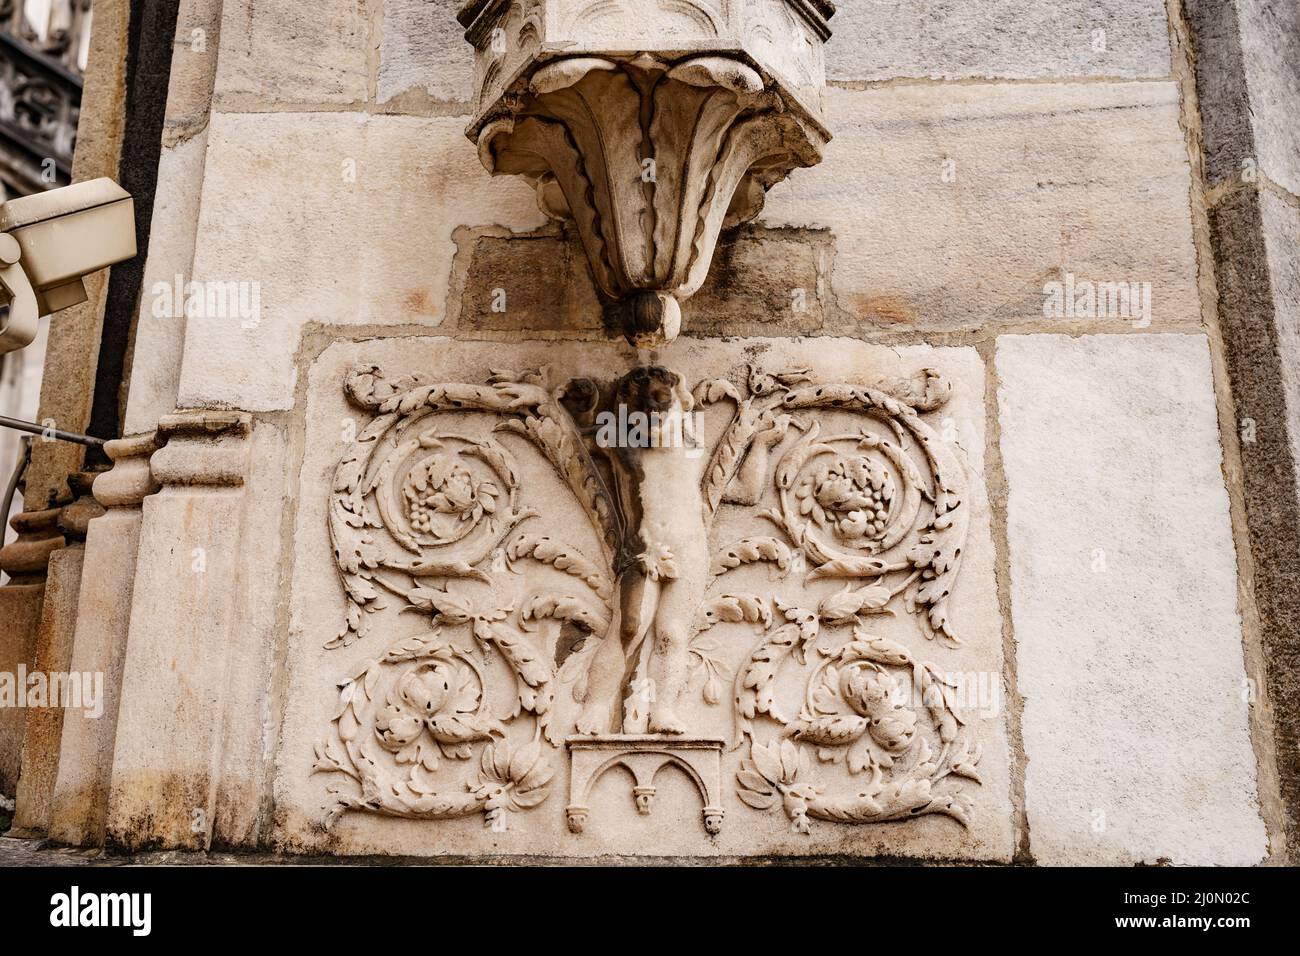 Boy with floral patterns on the stone slab of the Duomo facade. Milan, Italy Stock Photo